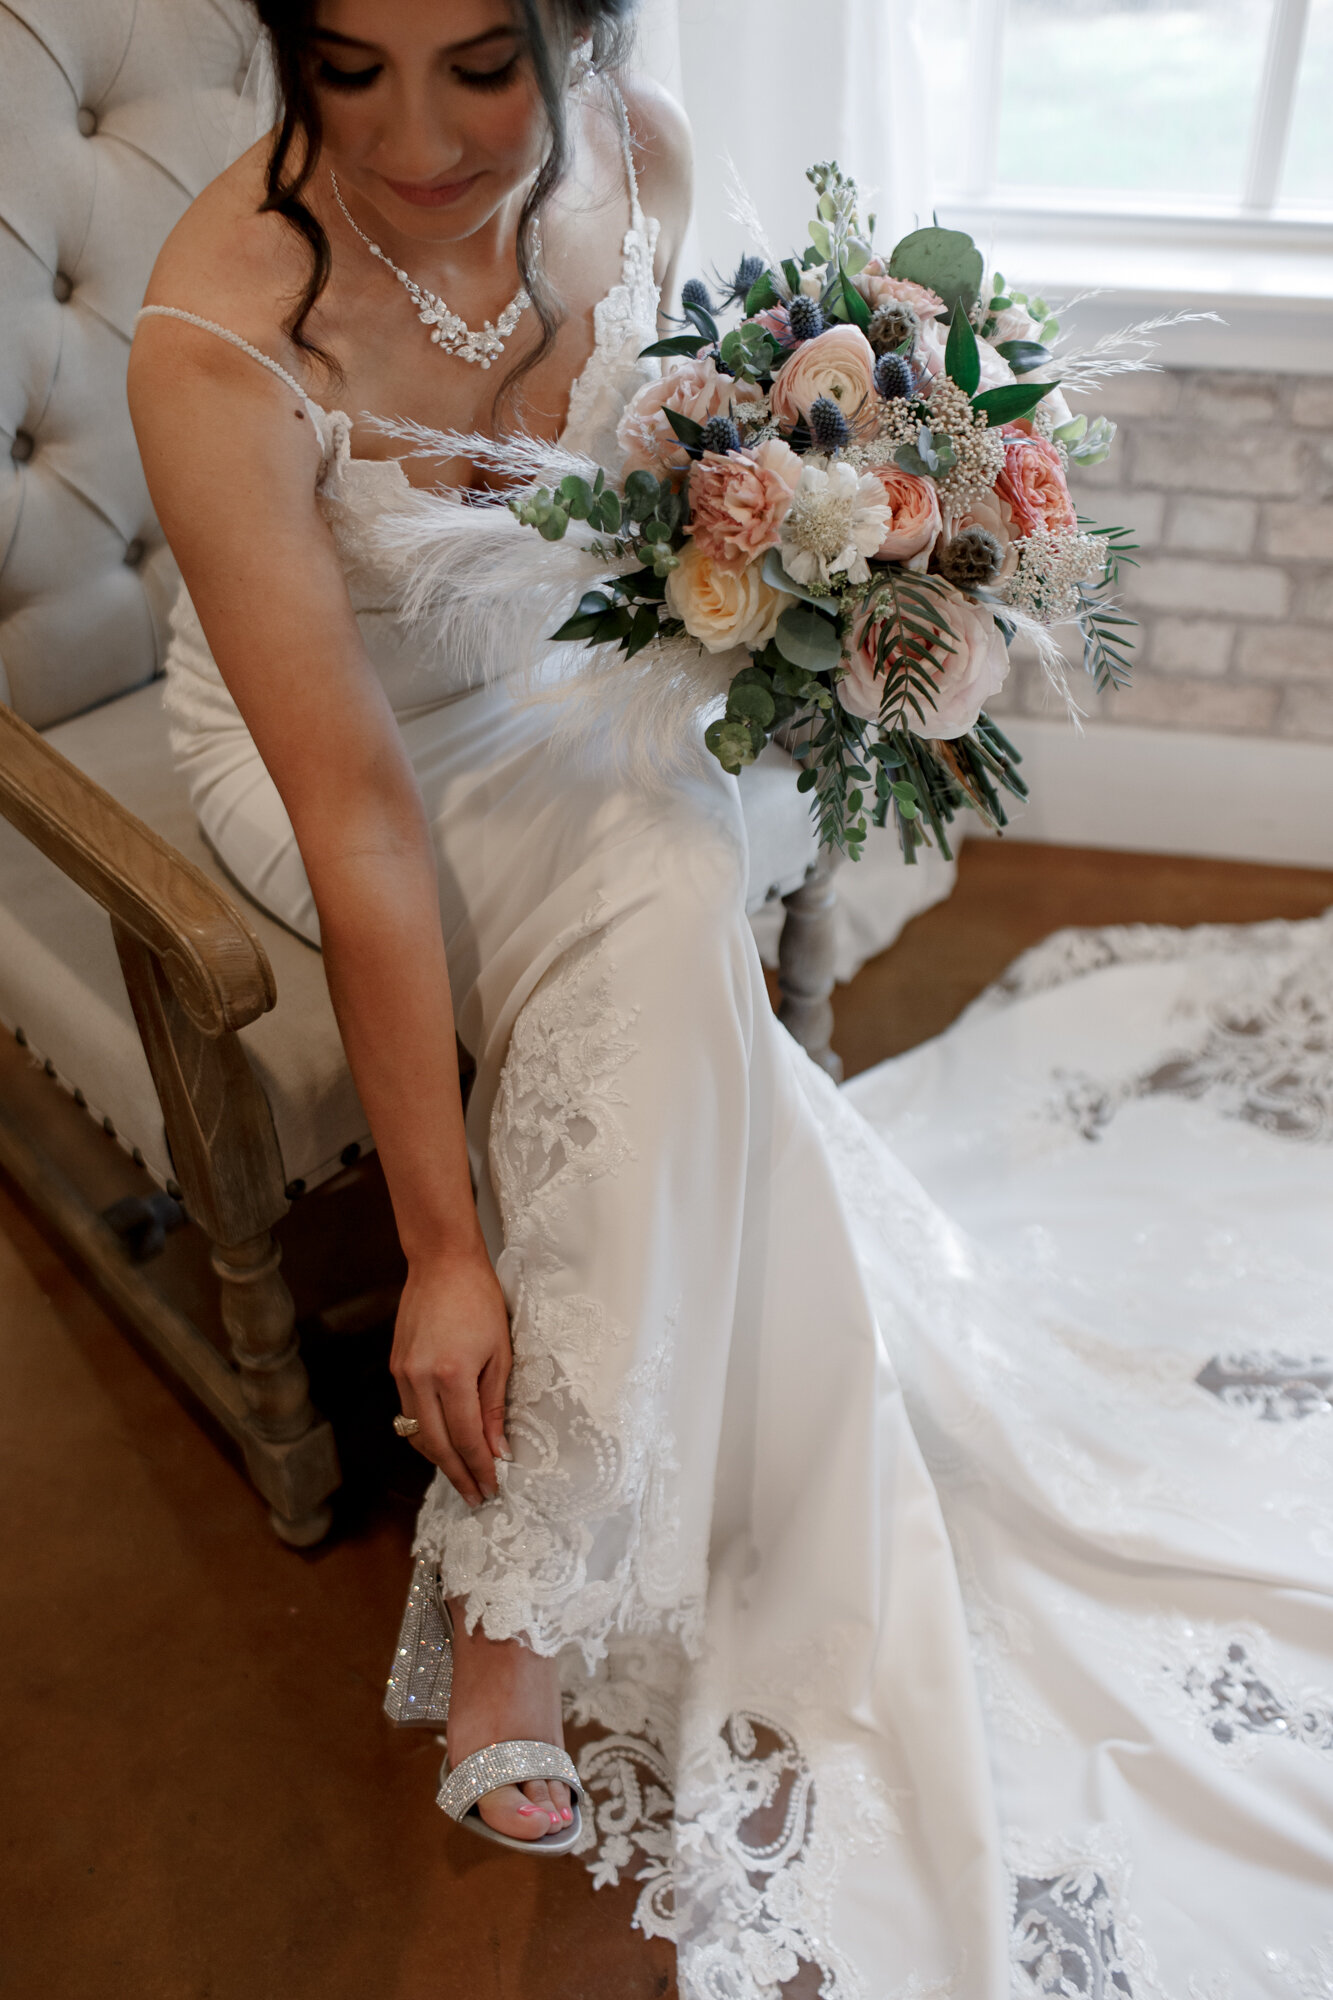 Bride fixing her sparkly shoe. Romantic Chic Country Wedding at Rustic Luxury Balmorhea Events&nbsp;Venue in Magnolia, TX